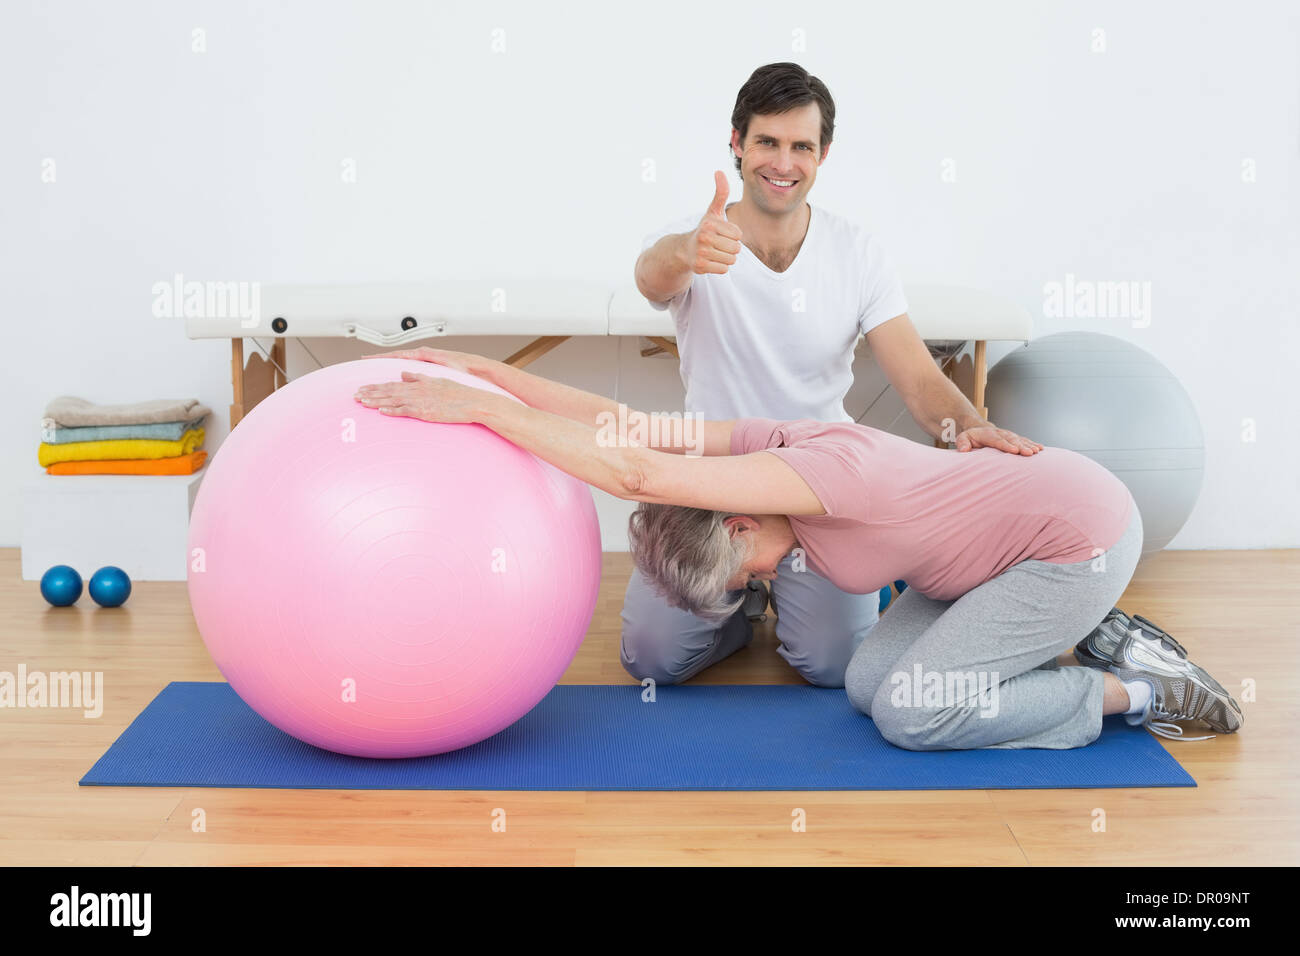 Therapist gesturing thumbs up by senior woman with yoga ball Stock Photo